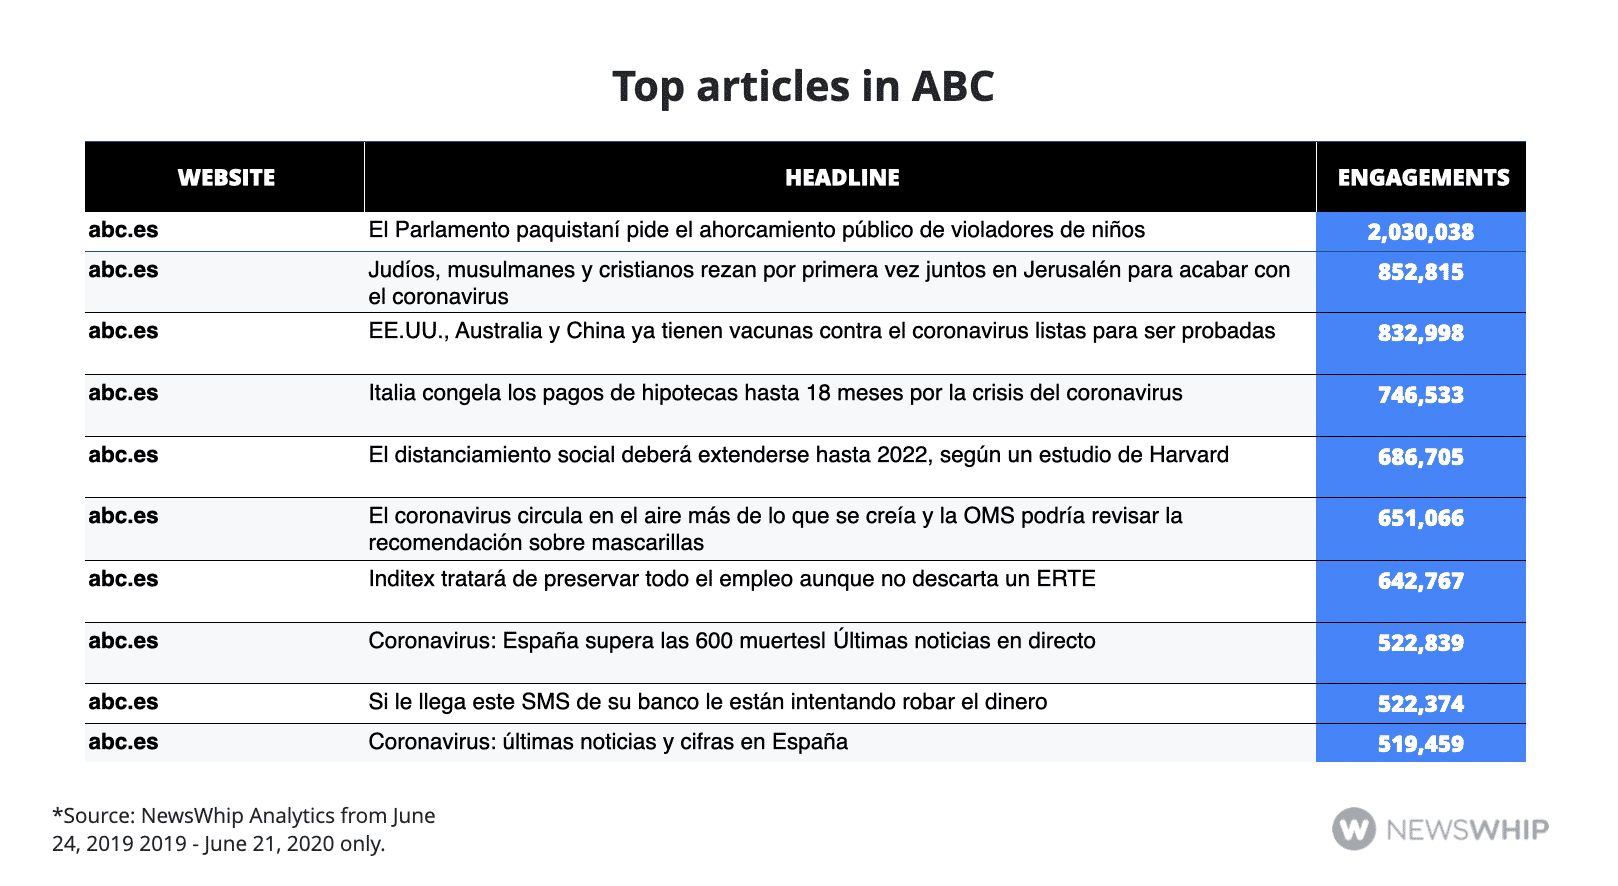 Chart showing the top articles of the last year in ABC, ranked by engagement